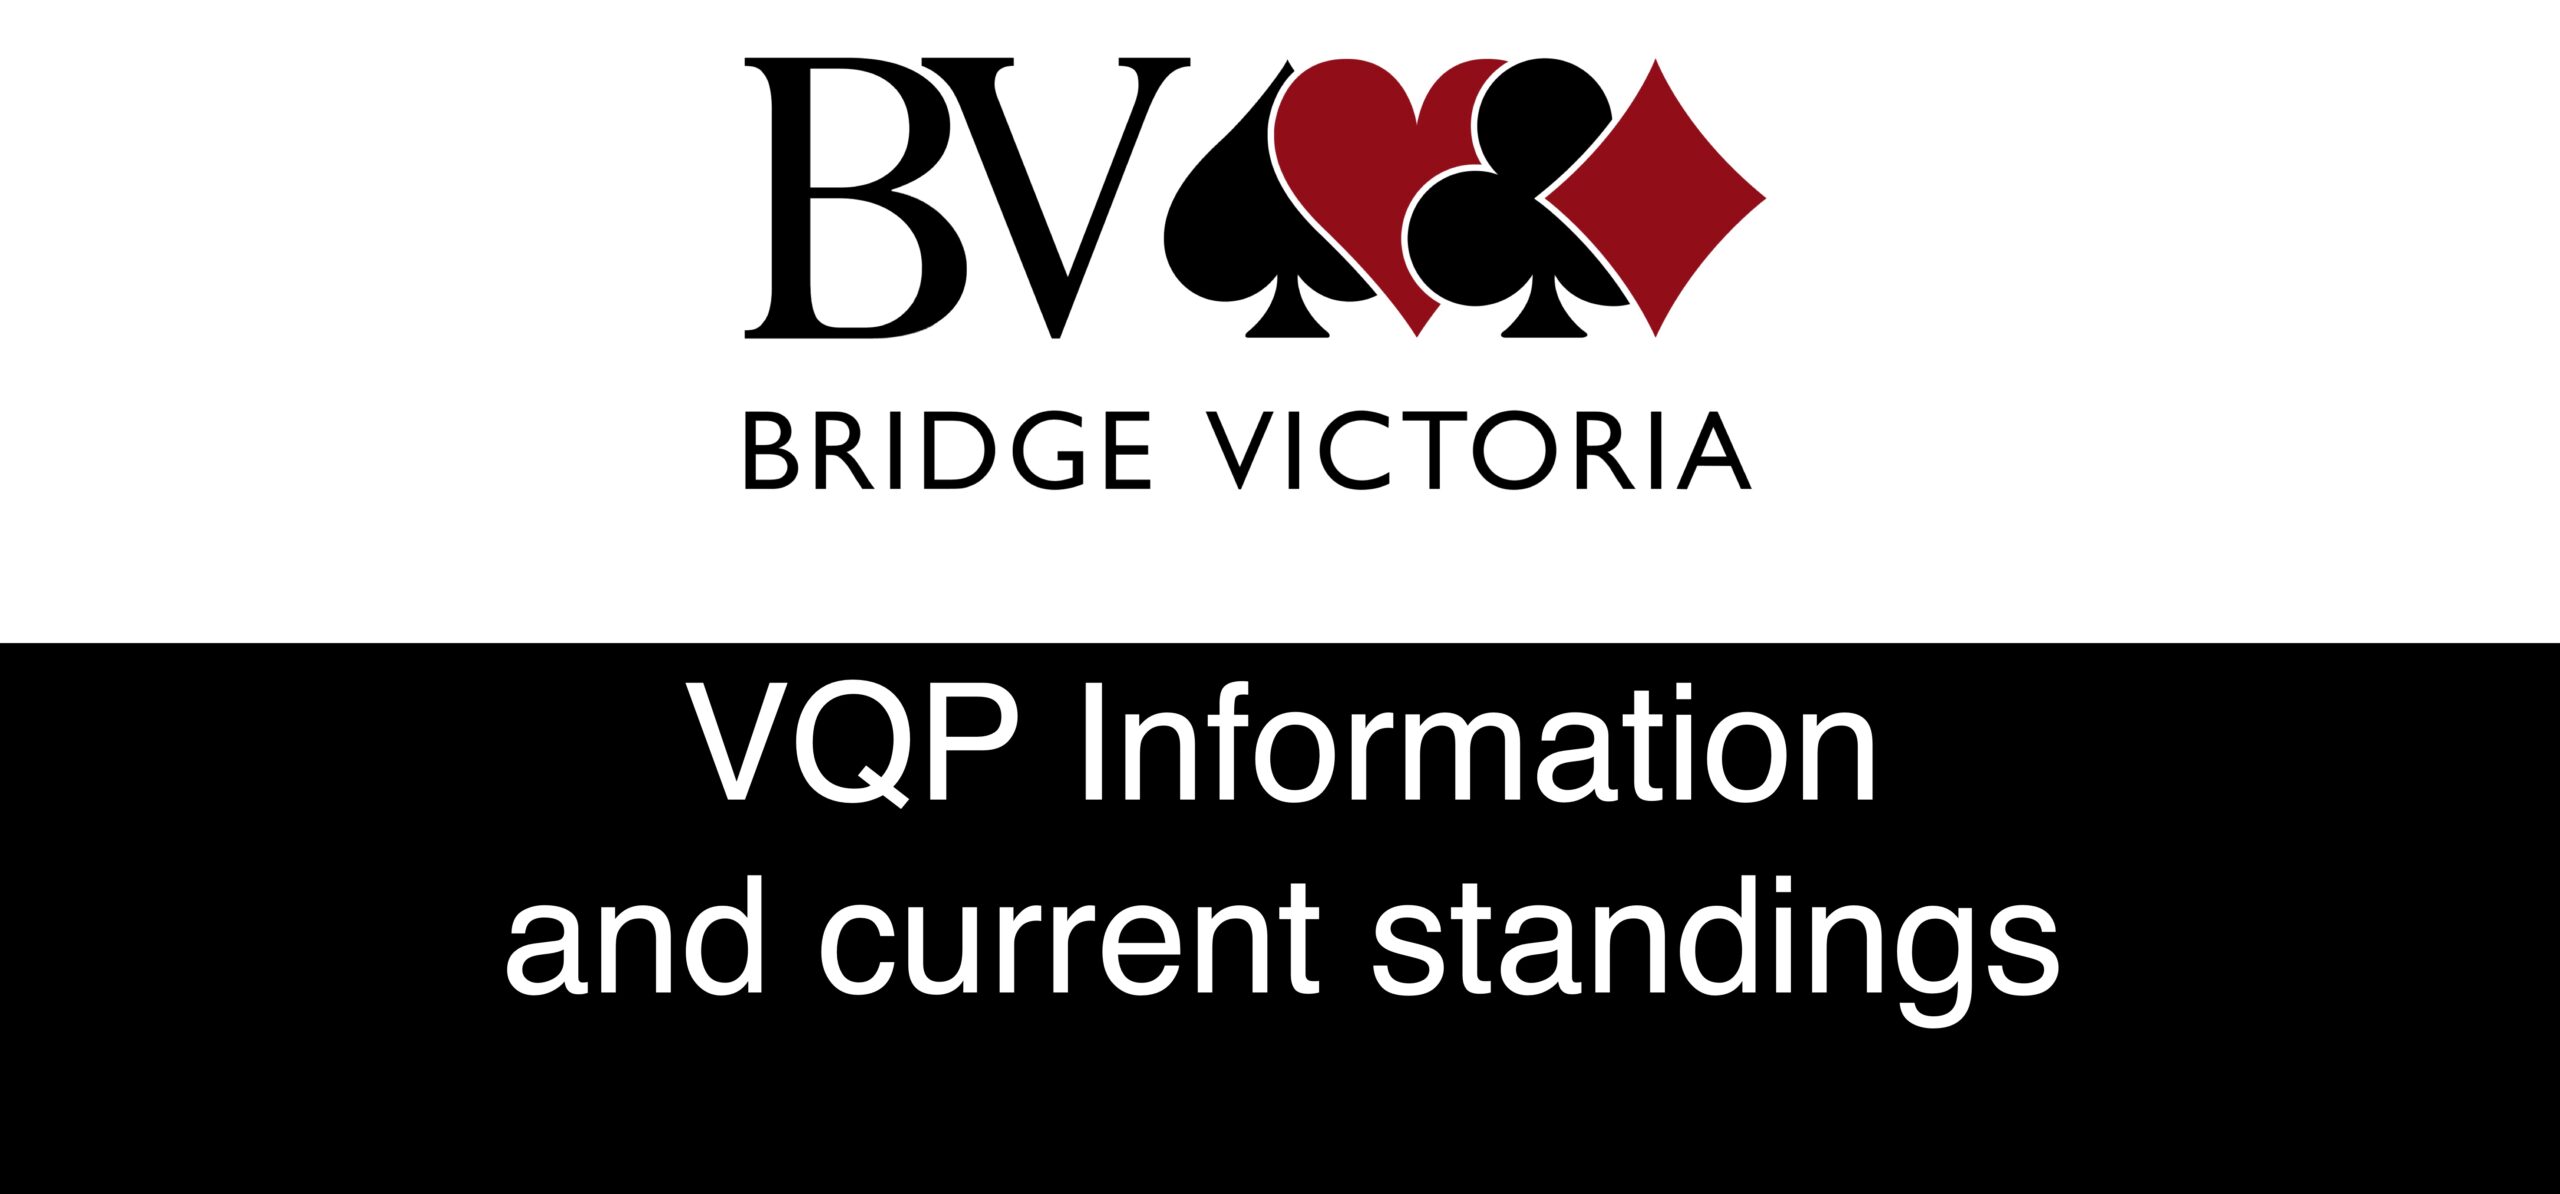 VQP Information and Standings